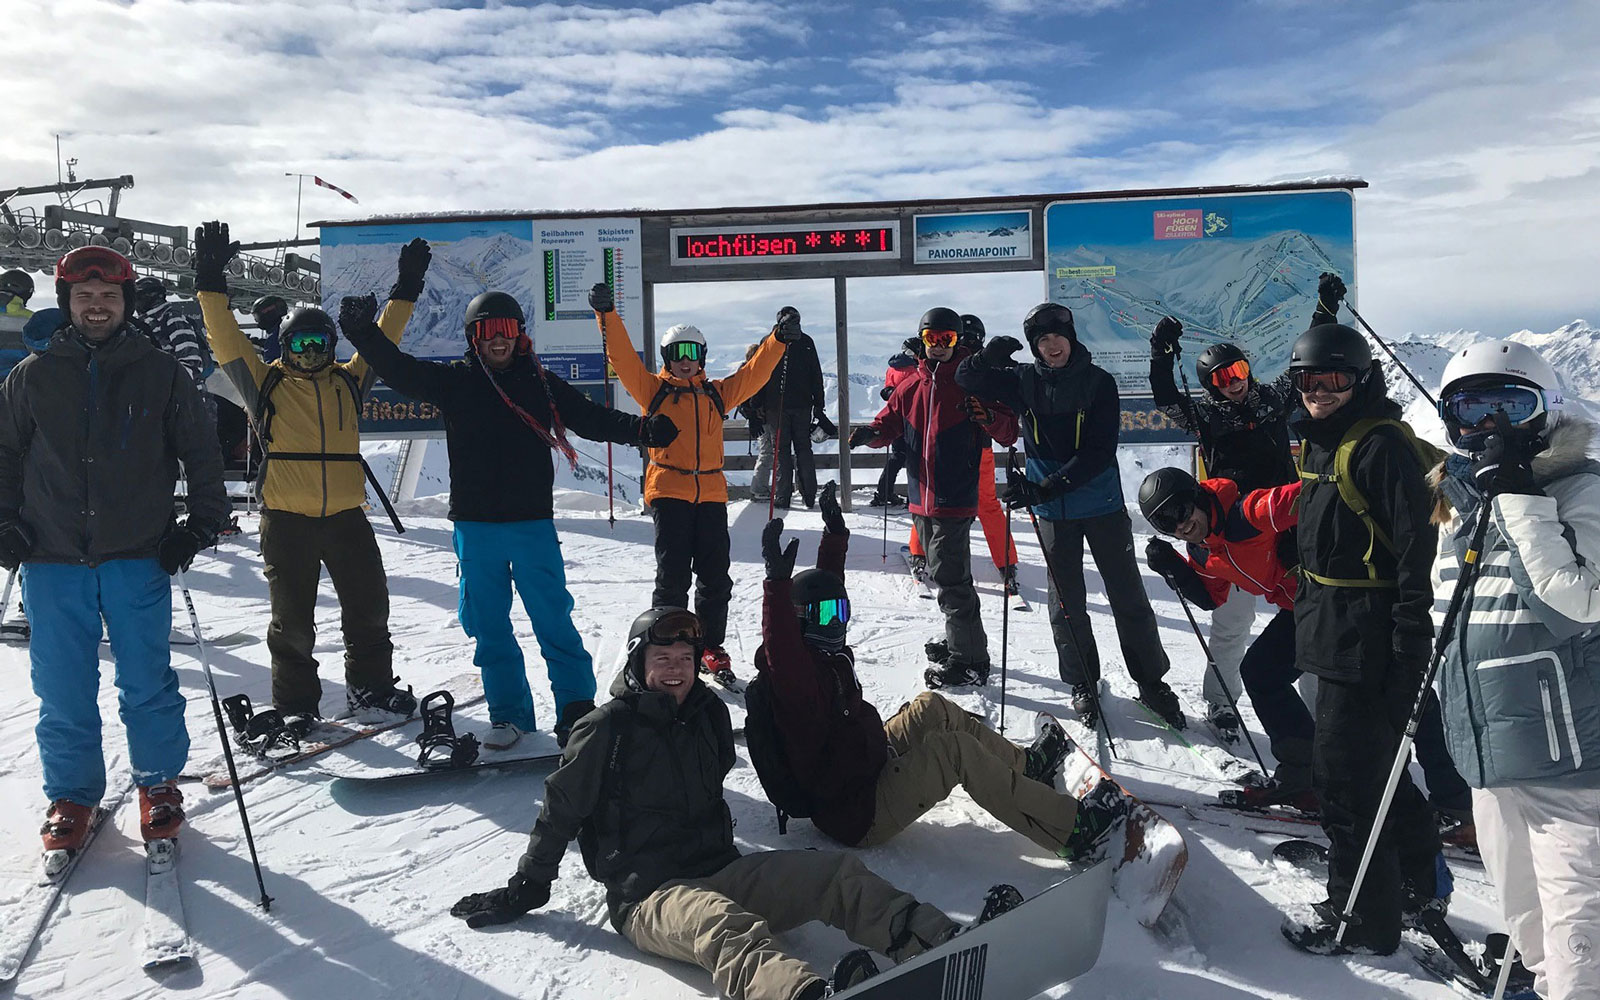 Employees on a ski slope at a team event.